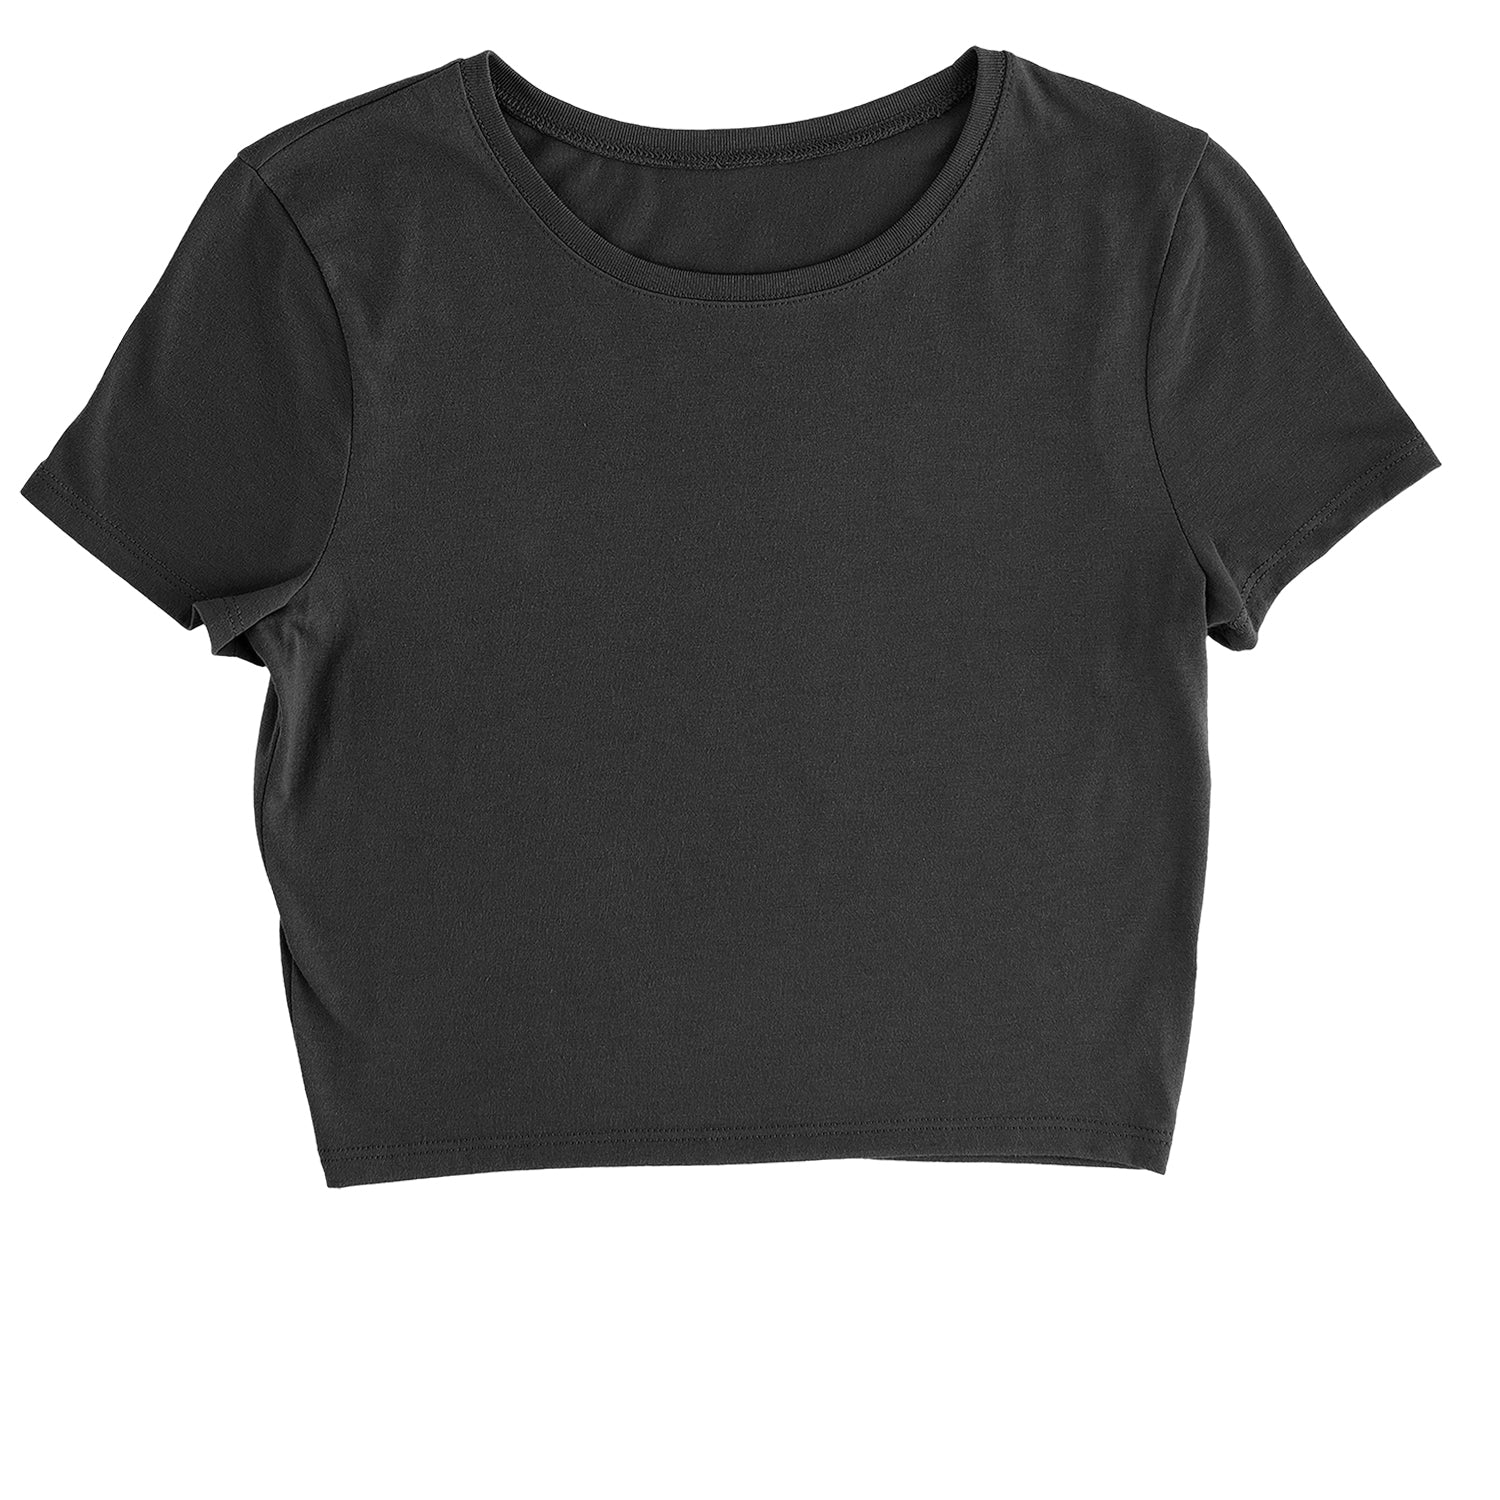 Custom Crop Top Ladies T-shirt create your own, custom, CustomClothing, personalized by Expression Tees